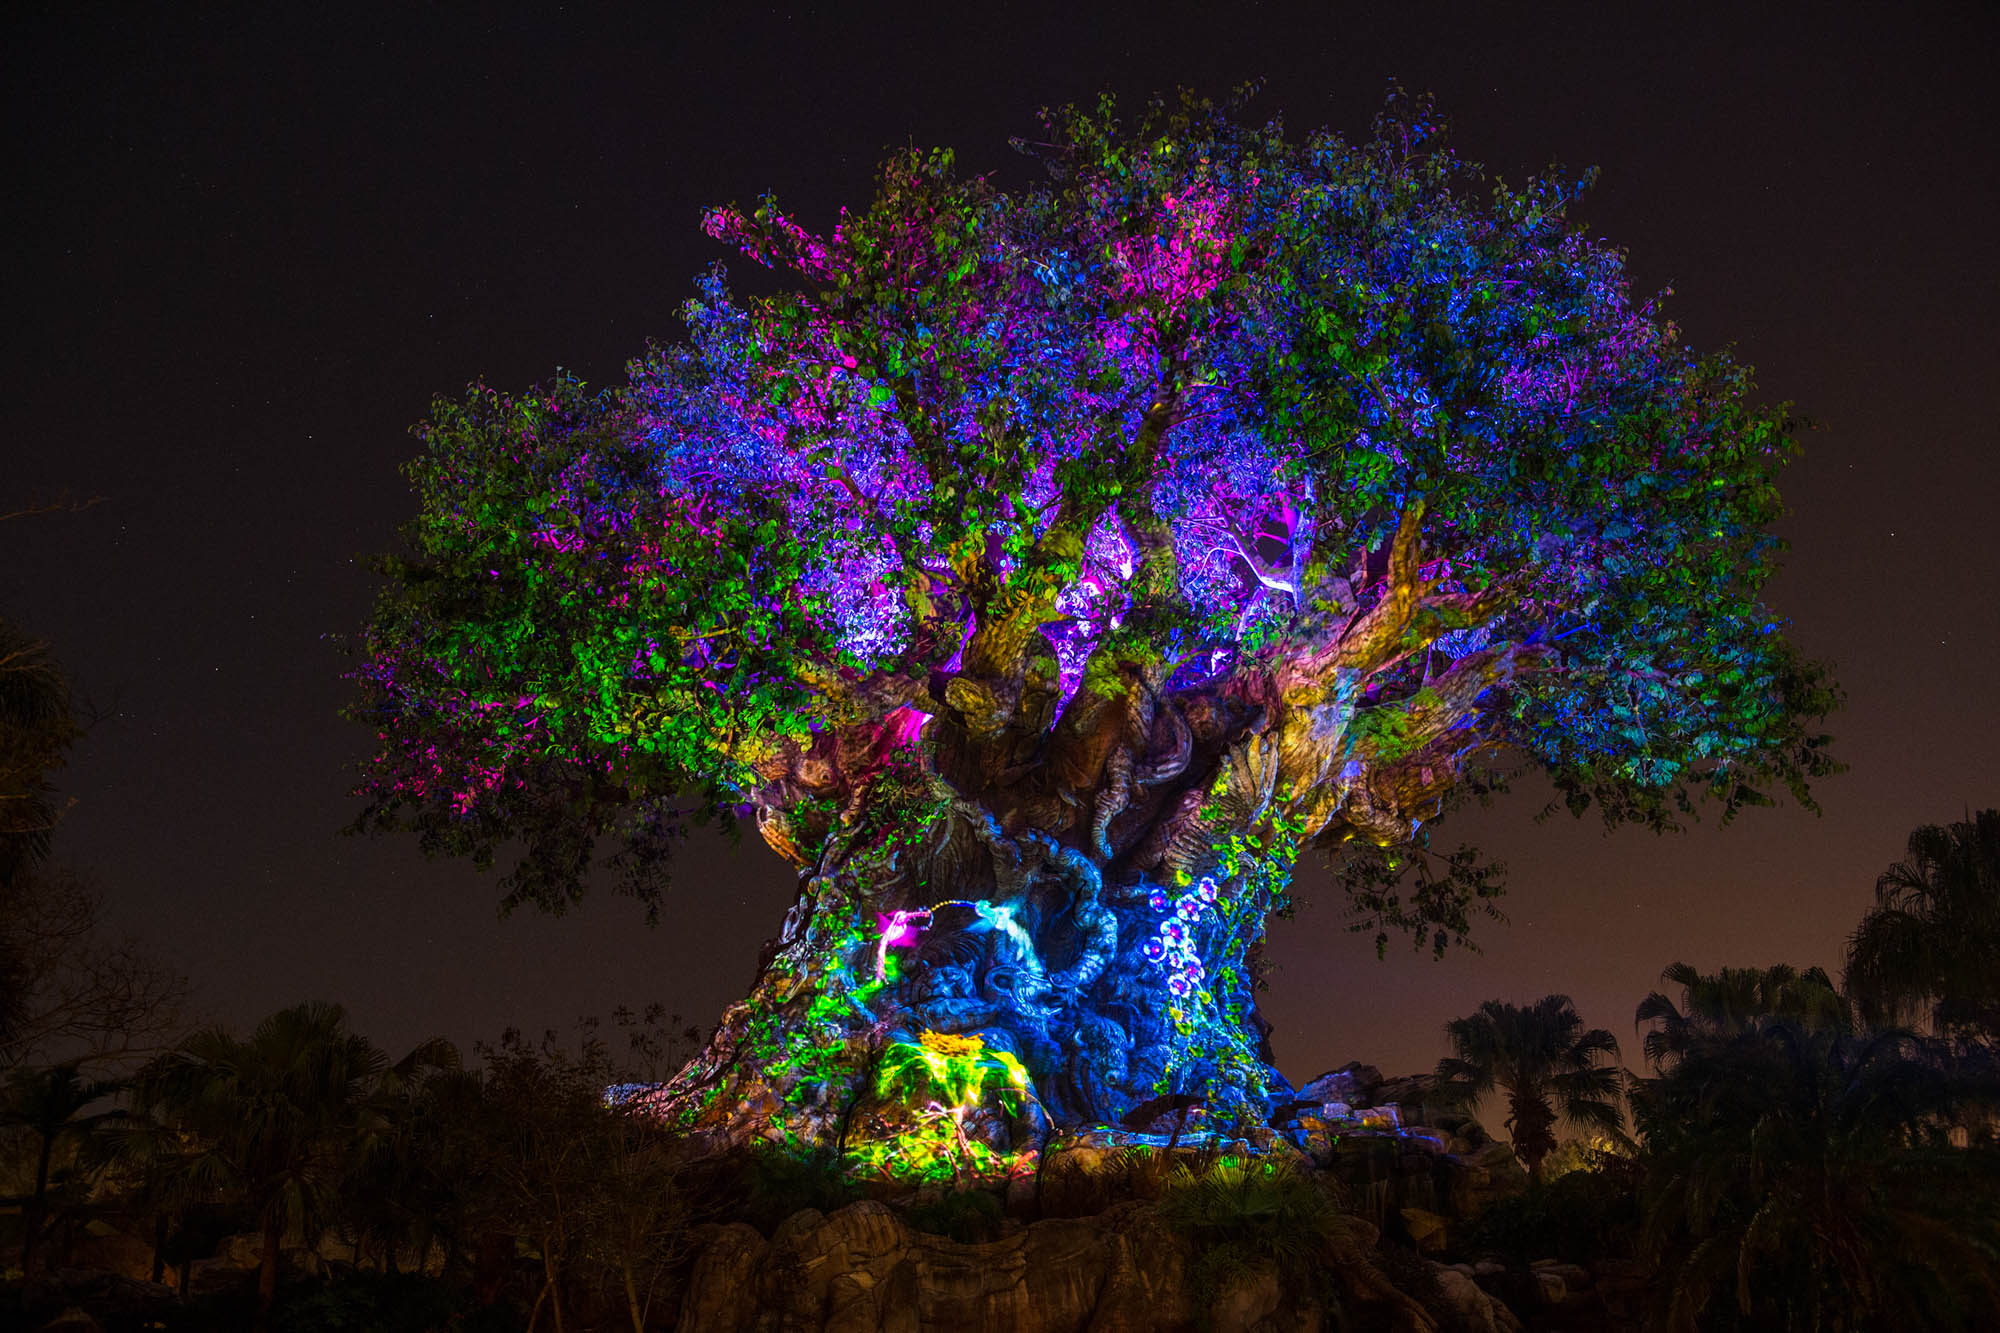 Disney's Animal Kingdom's iconic Tree of Life will undergo extraordinary ÒawakeningsÓ throughout each evening as the animal spirits are brought to life by magical fireflies that reveal colorful stories of wonder and enchantment. Projections of nature scenes take on a magical quality as they appear to dramatically emanate from within the Tree of Life. (David Roark, photographer)